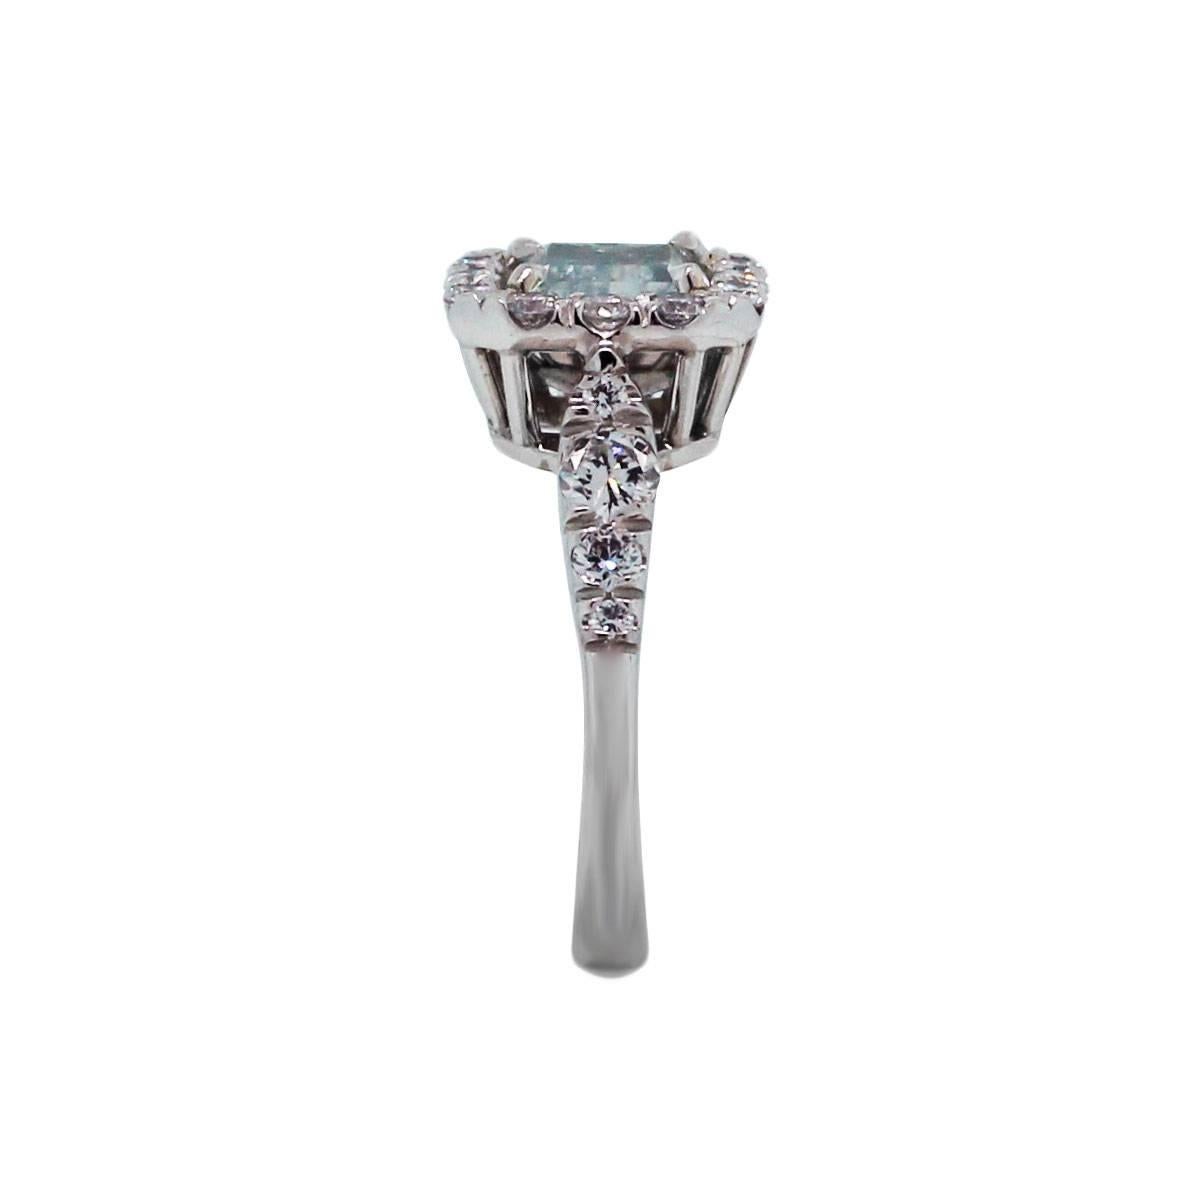 Style: Platinum GIA Certified 1.20ct Natural Fancy Blue/Green Cushion Cut Diamond Engagement Ring
Material : Platinum & 18k White Gold
Center Diamond Details : 1.20ct Natural Blue Green Cushion Cut diamond. Diamond is VS2 in clarity. Measuring